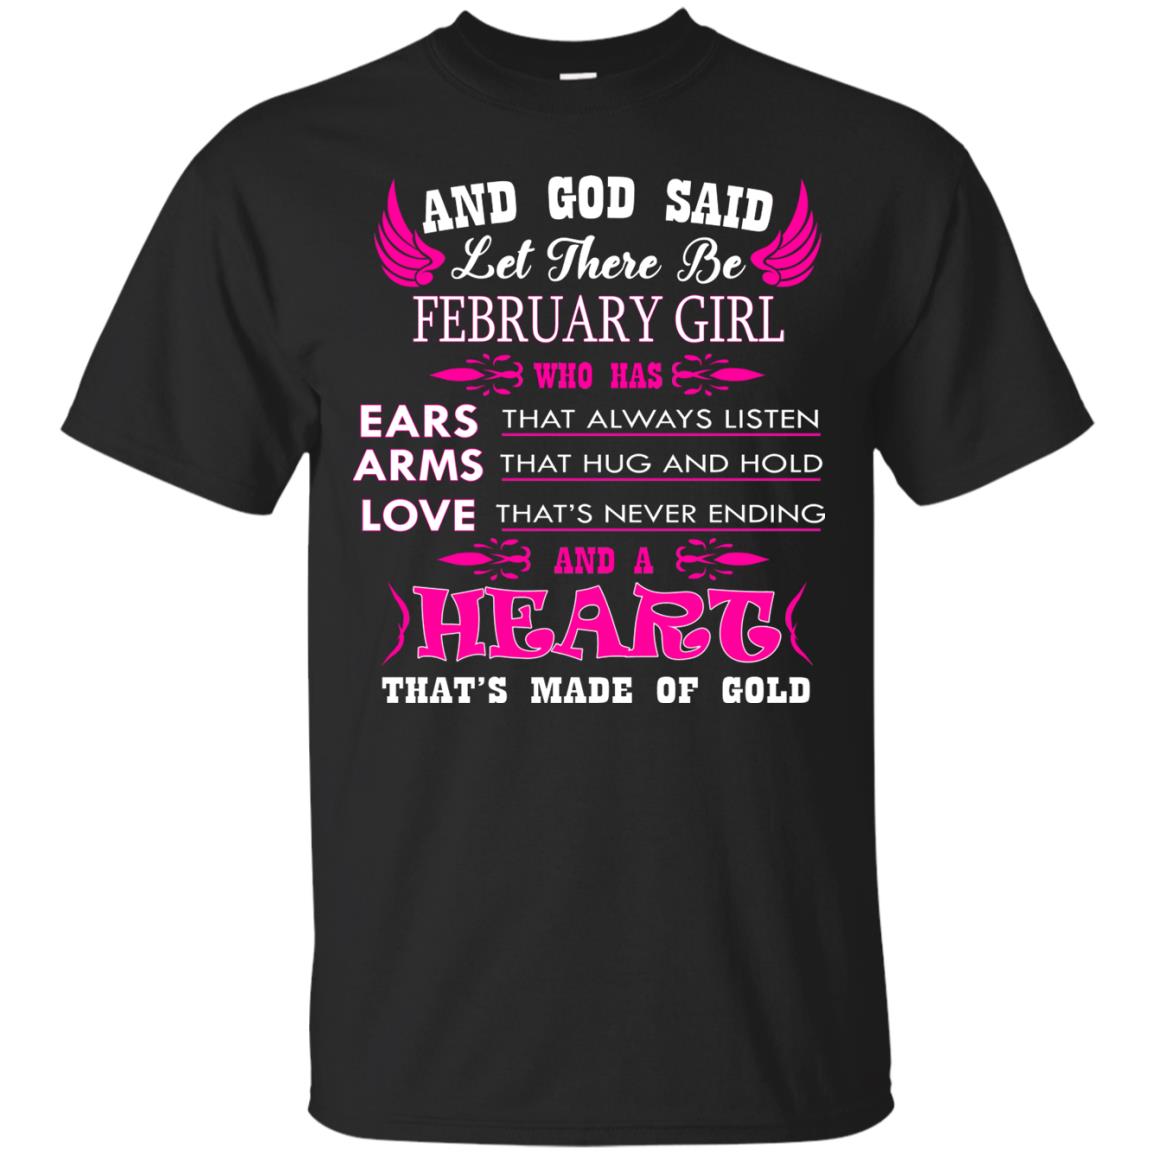 And God Said Let There Be February Girl Who Has Ears - Arms - Love Shirt